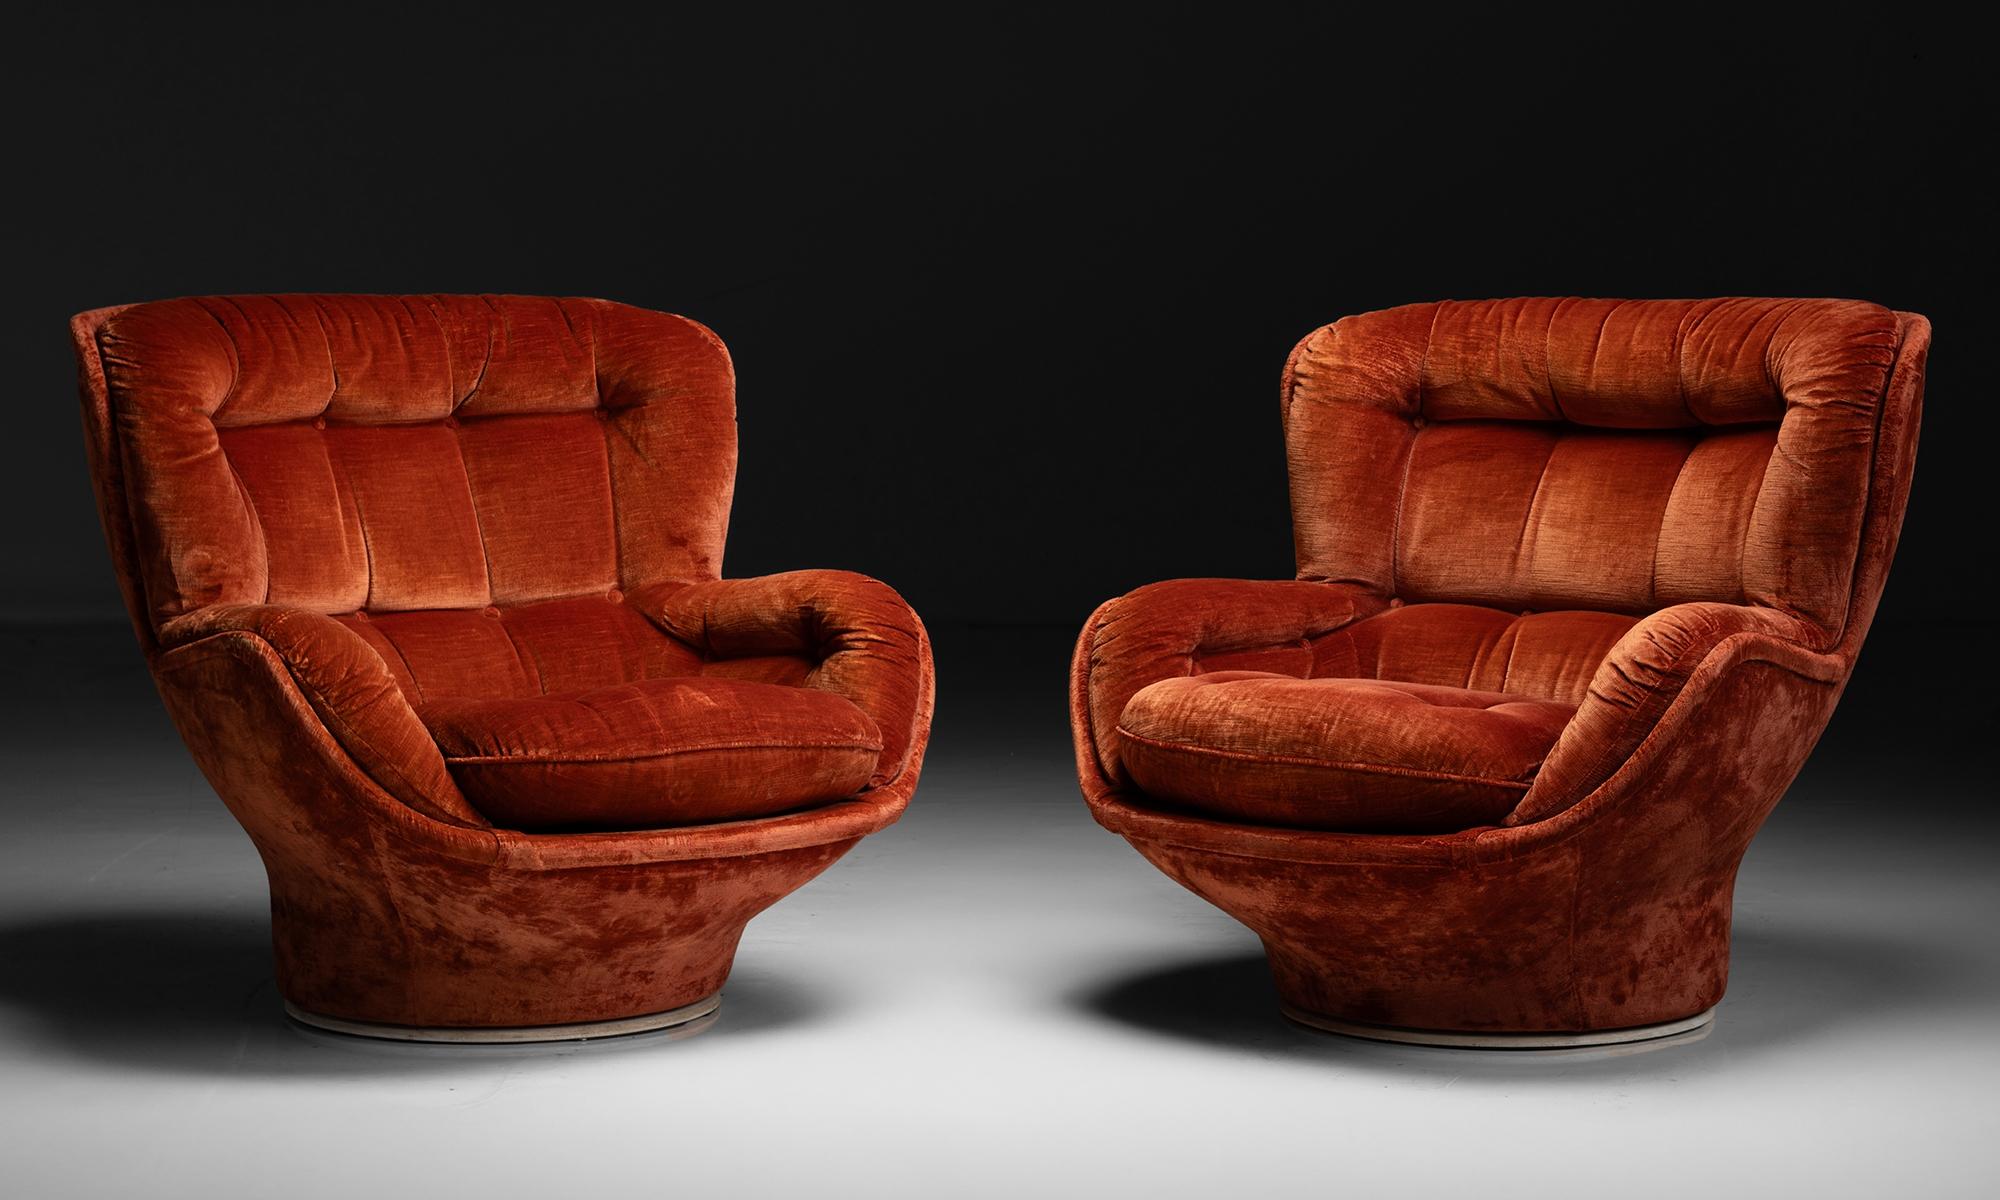 Swivel Lounge Chairs
France circa 1970
Karate armchairs by Michael Cadestin. In original burnt orange velvet, made for Airborne.
37.5”w x 36”d x 34”h x 16”seat